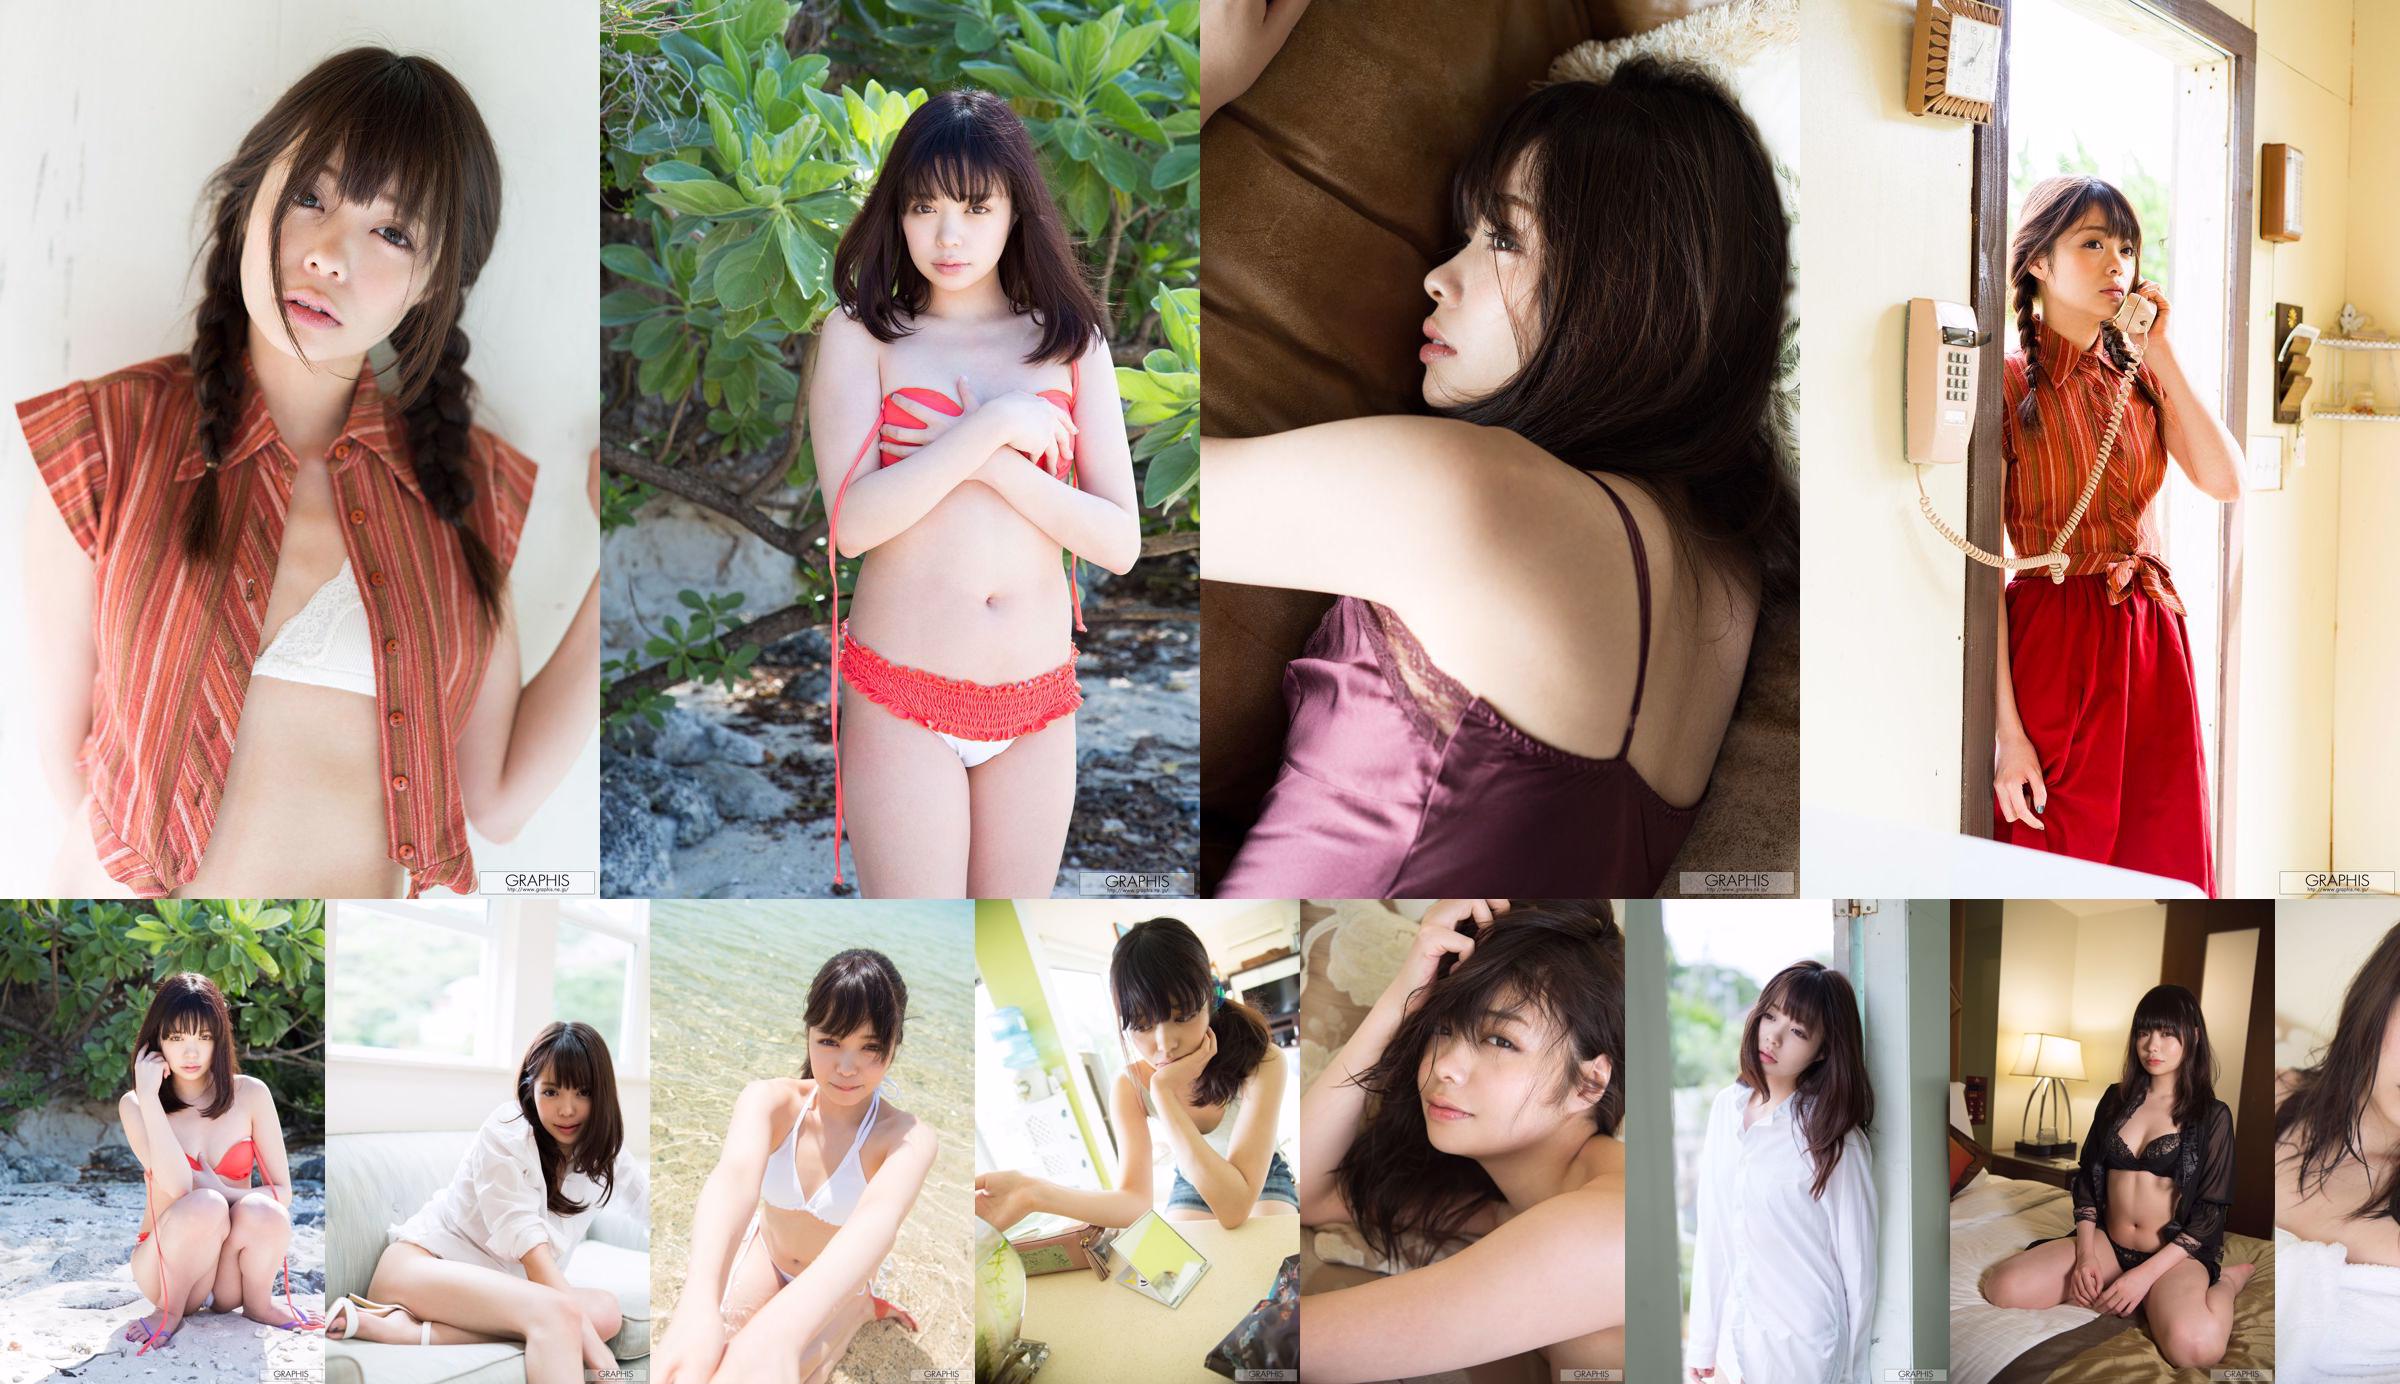 Kaname Ootori Kaname Otori / Kaname Otori [Graphis] First Gravure First Gravure No.2e3351 Page 34